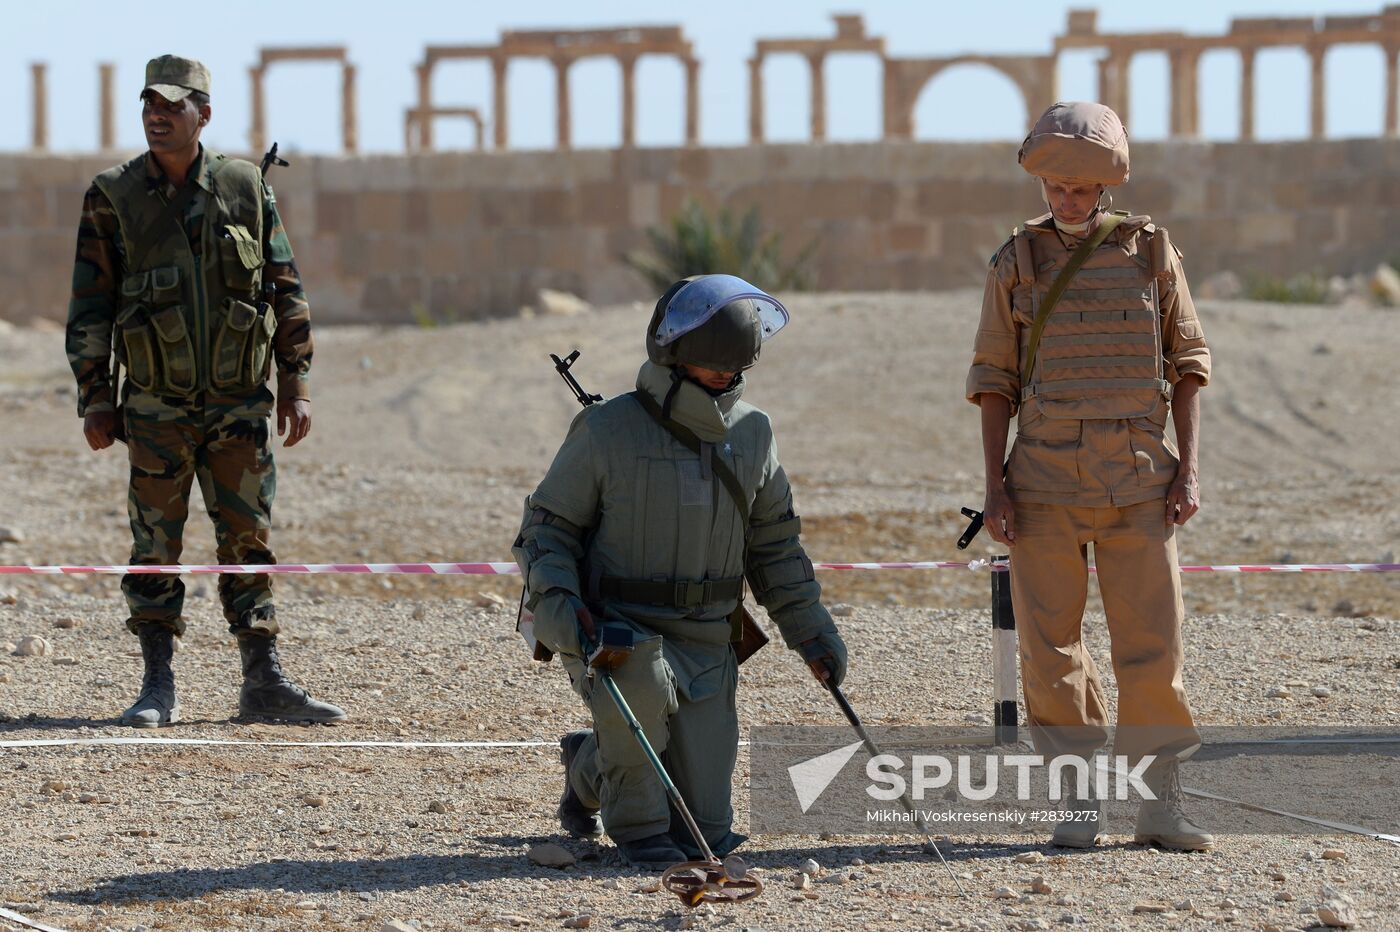 Syrian soldiers train in search tactics for explosive devices